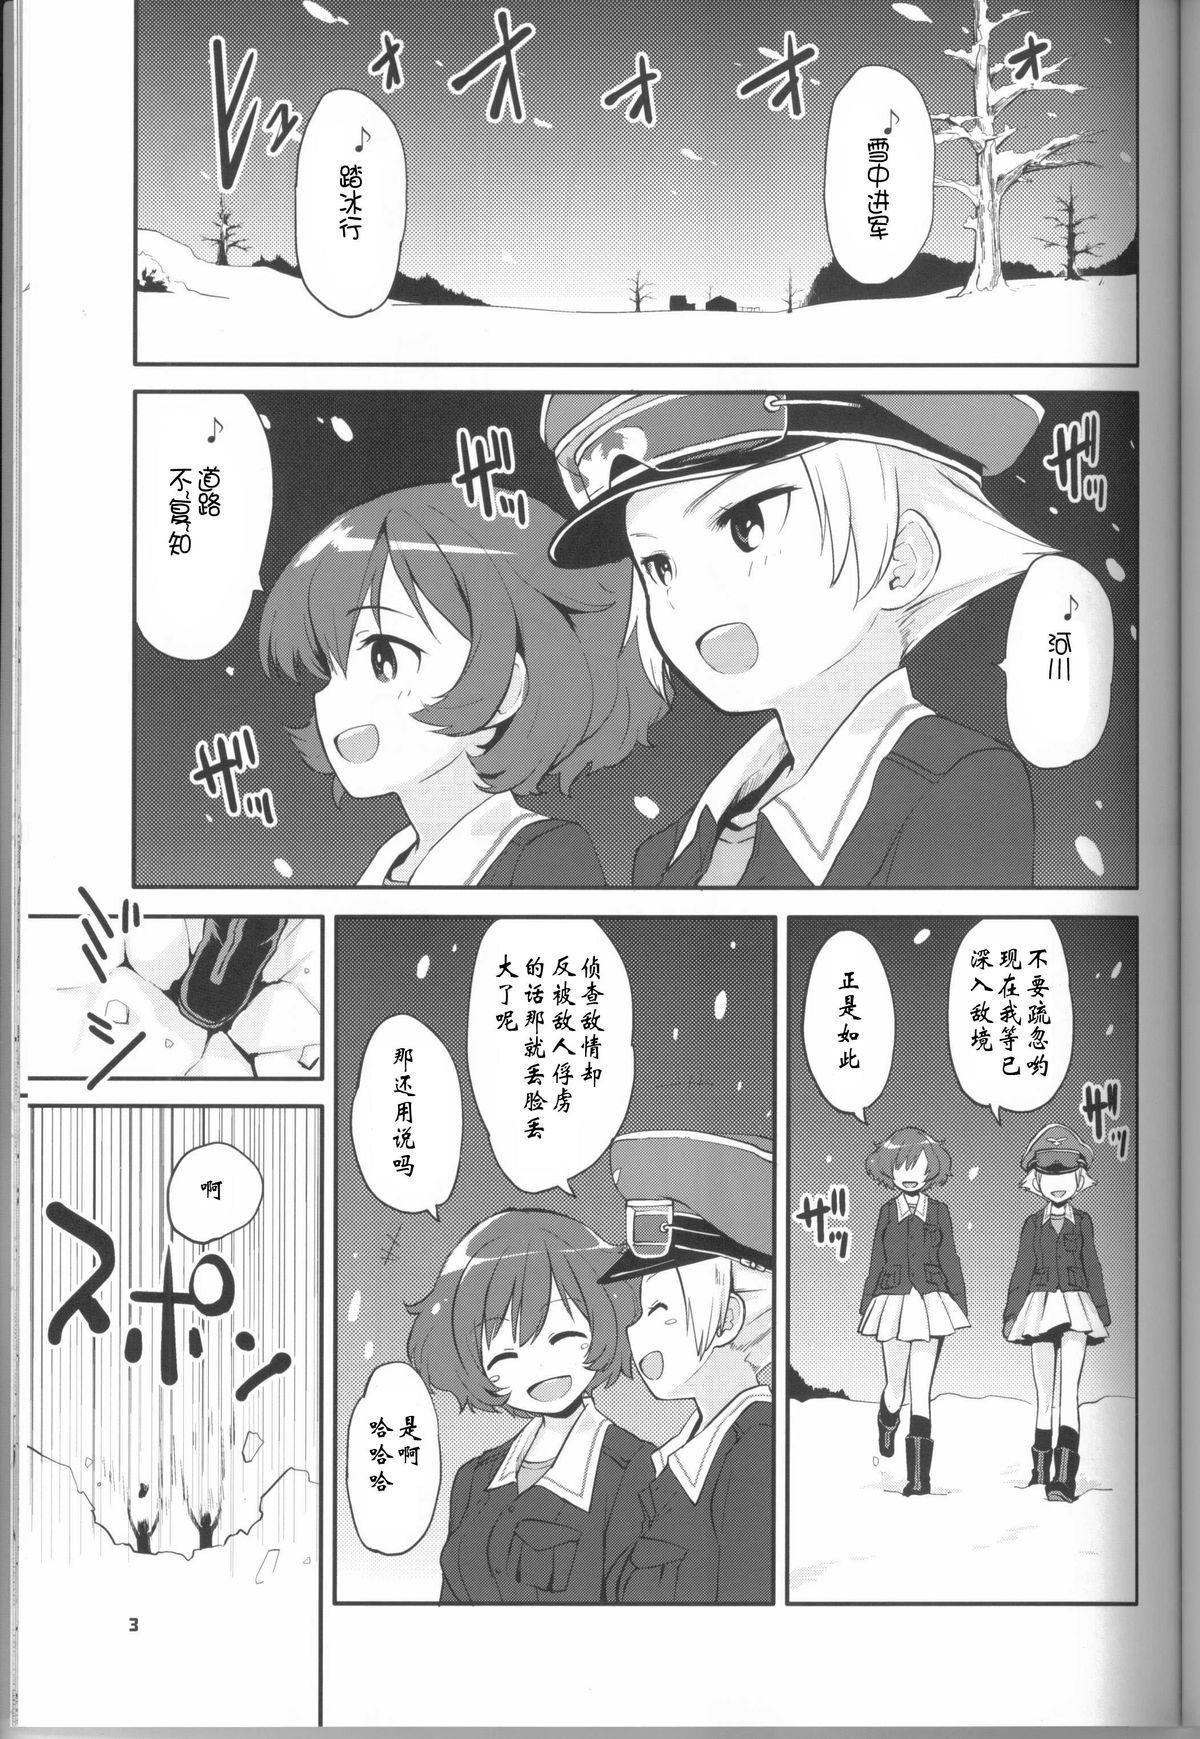 Dildo Fucking The General Frost Has Come! - Girls und panzer Gay Tattoos - Page 2